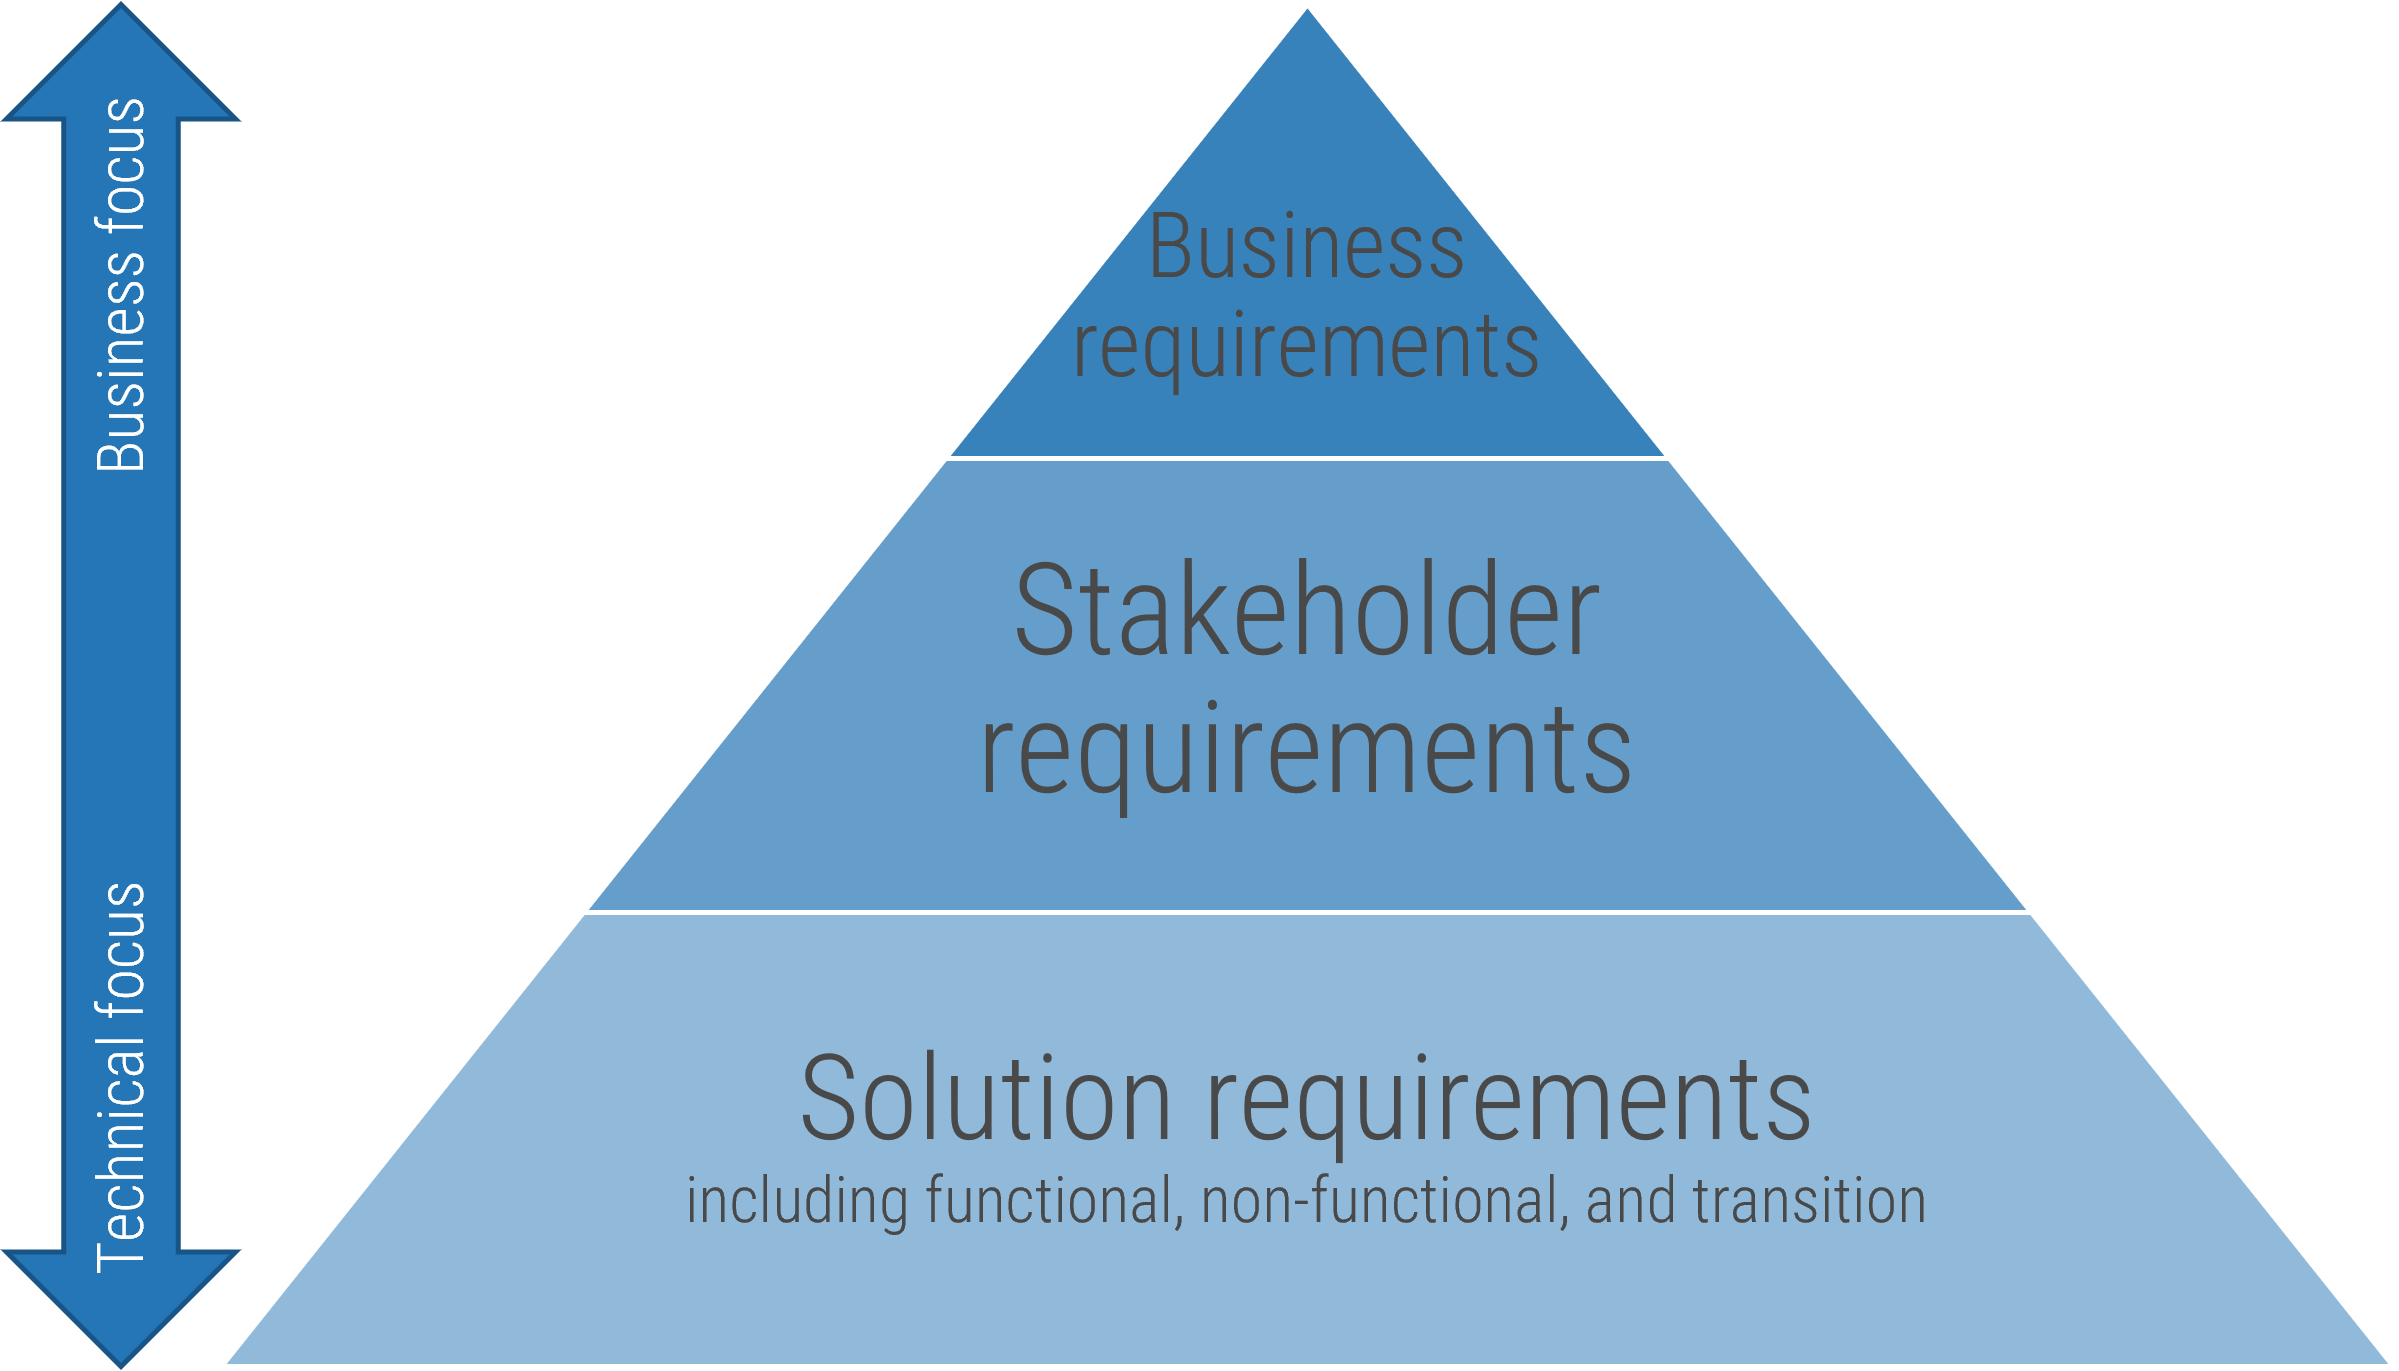 This is a pyramid, with the base being: Solution Requirements; The middle being: Stakeholder Requirements; and the Apex being: Business Requirements.